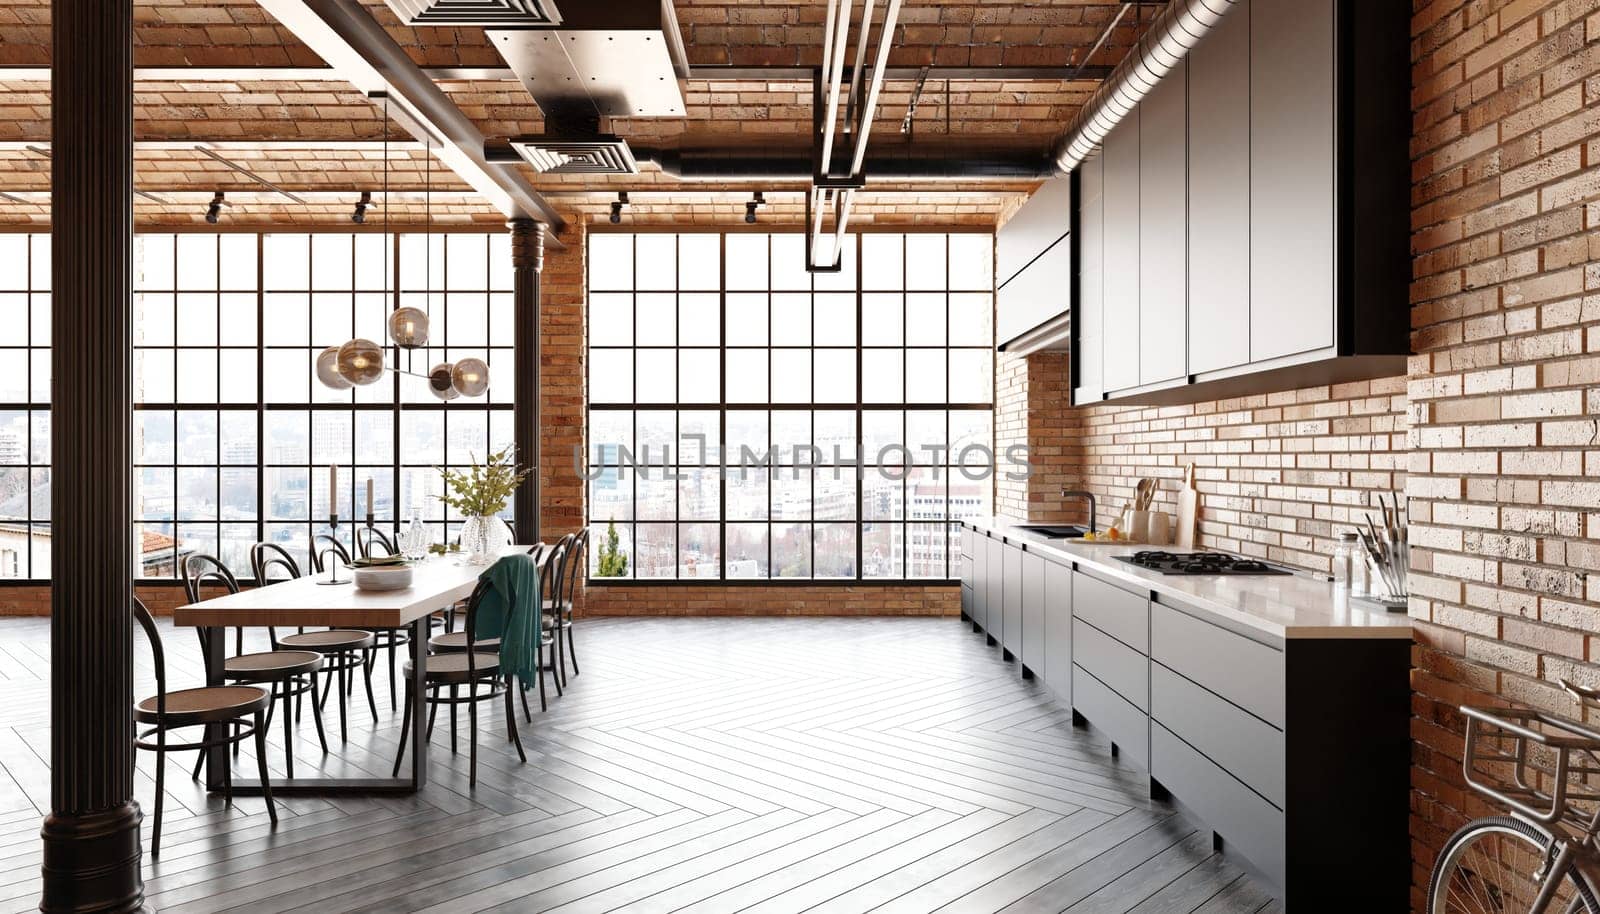 Interior of modern kitchen with brick walls, wooden floor, gray countertops and bar with stools. 3d rendering